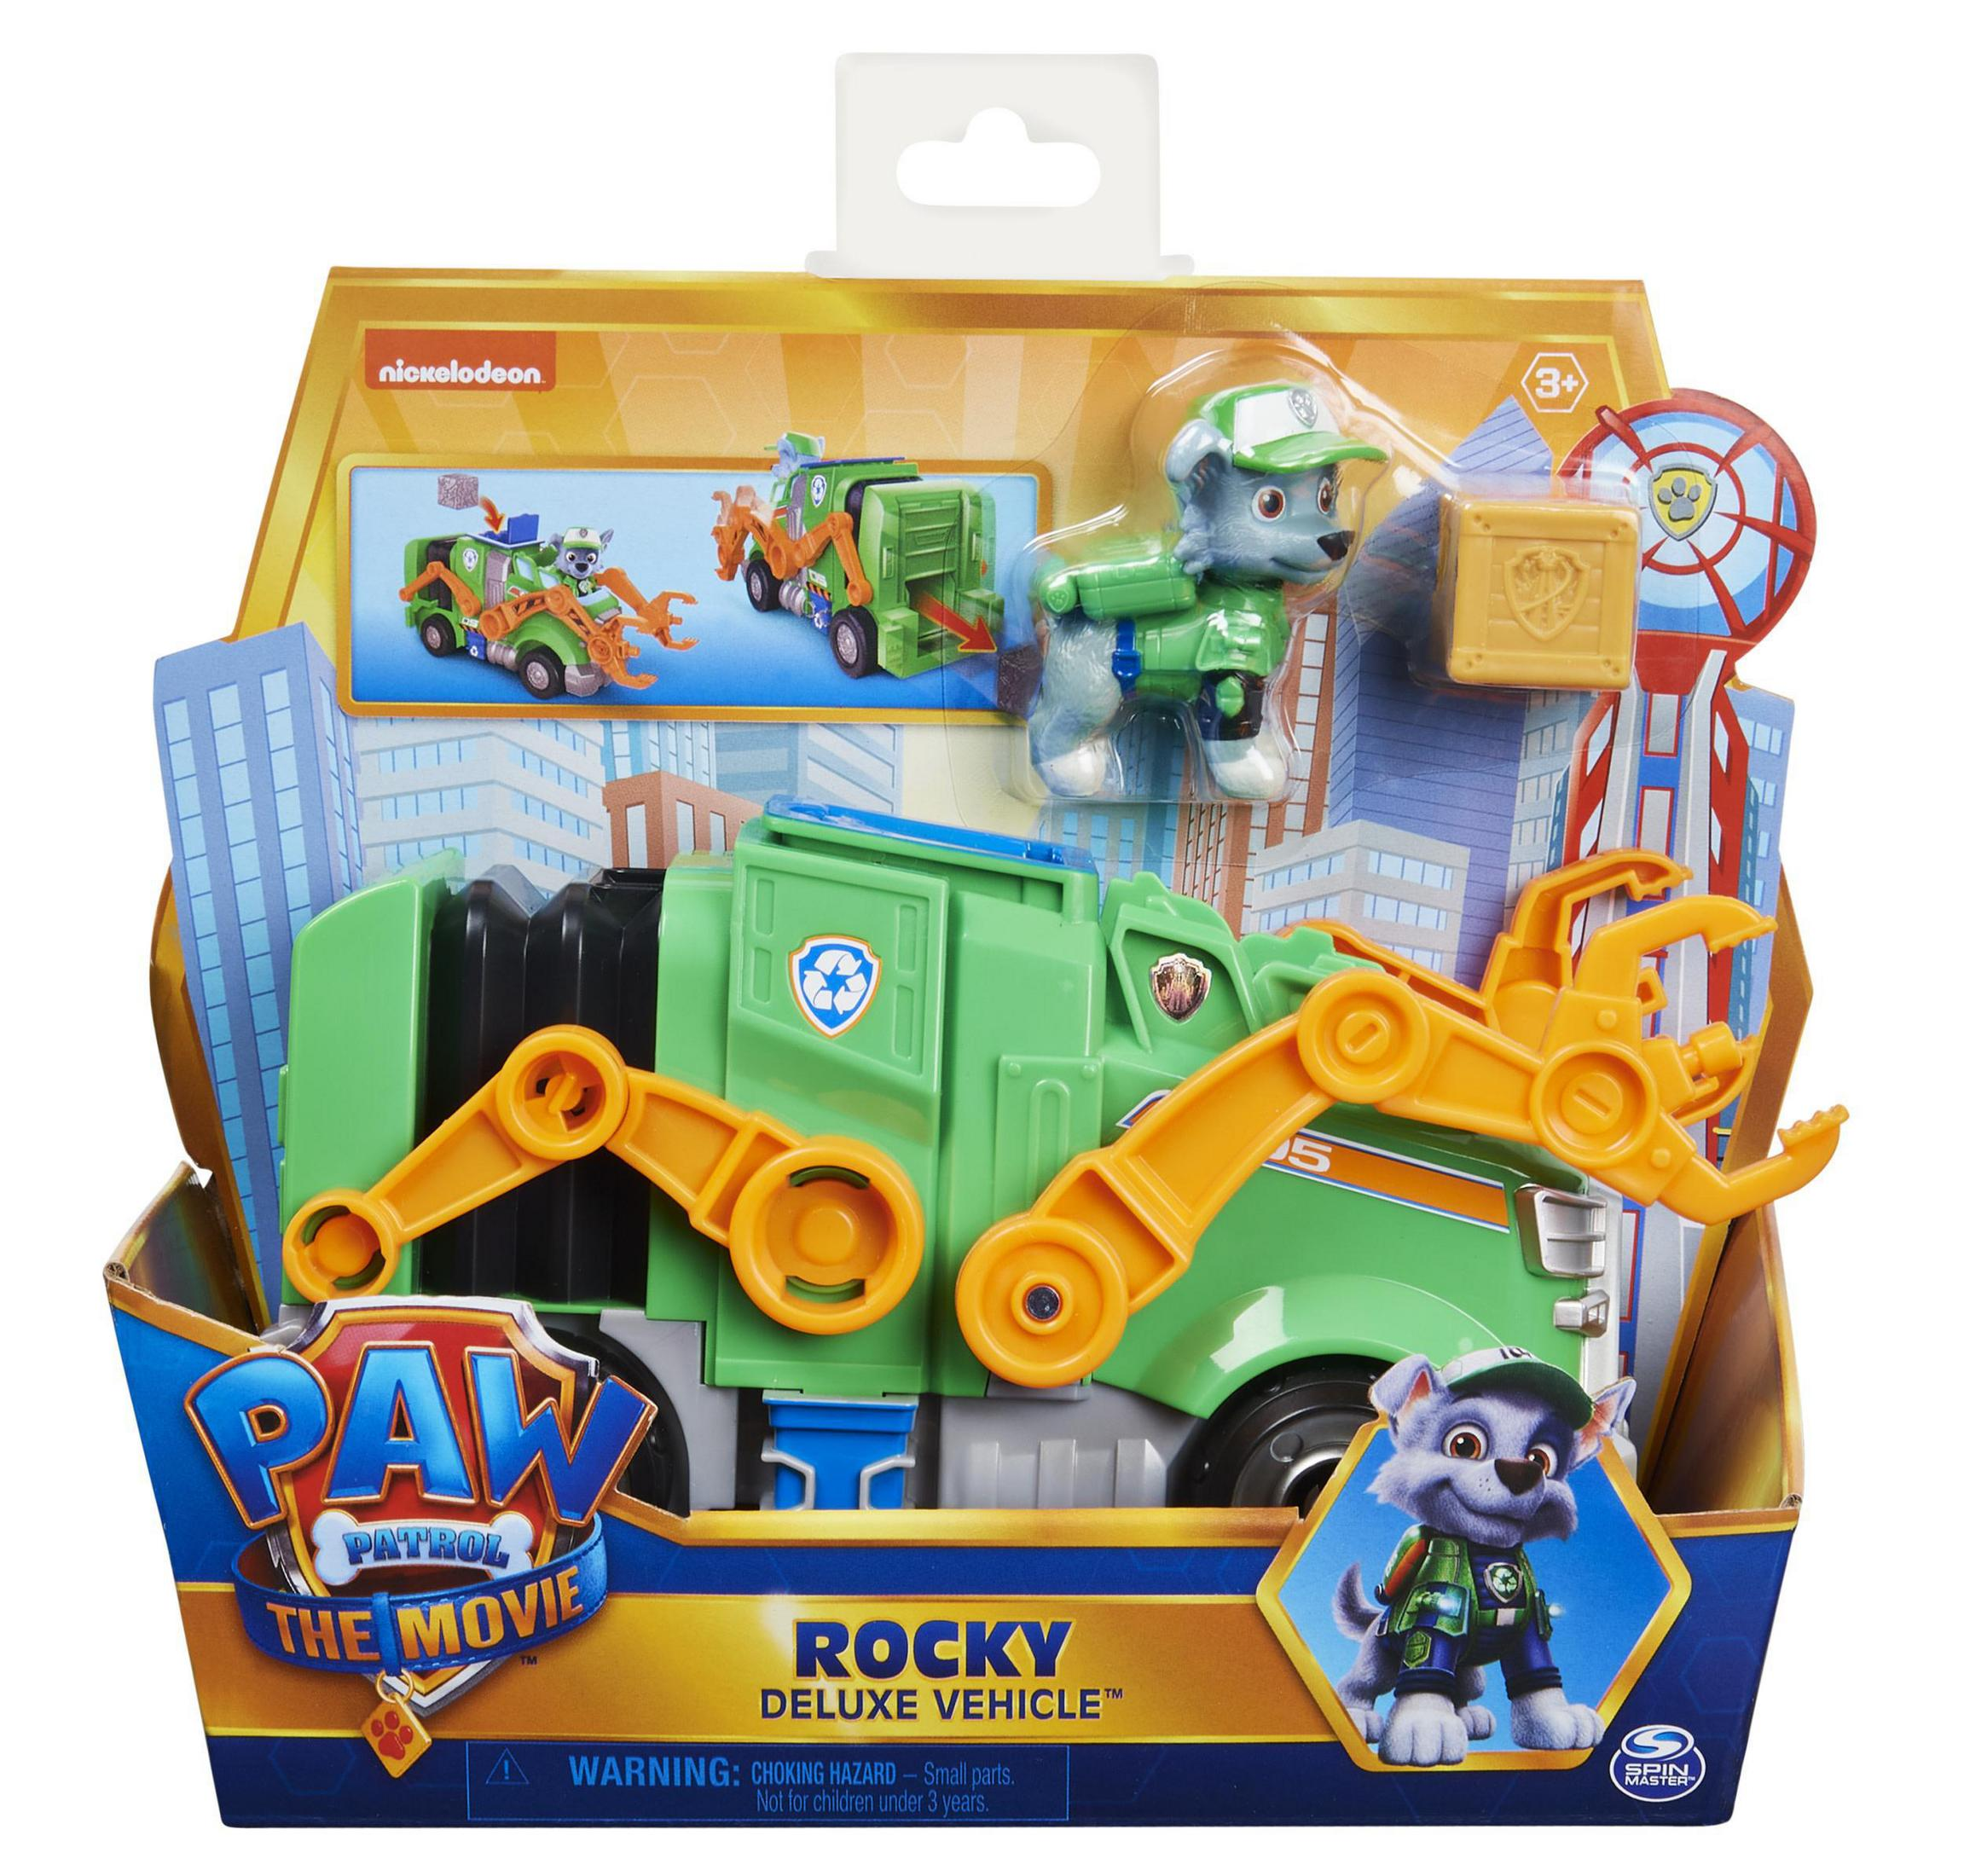 MASTER ROCKY SPIN PAW Mehrfarbig VEHICLE MOVIE BASIC Spielset 39882